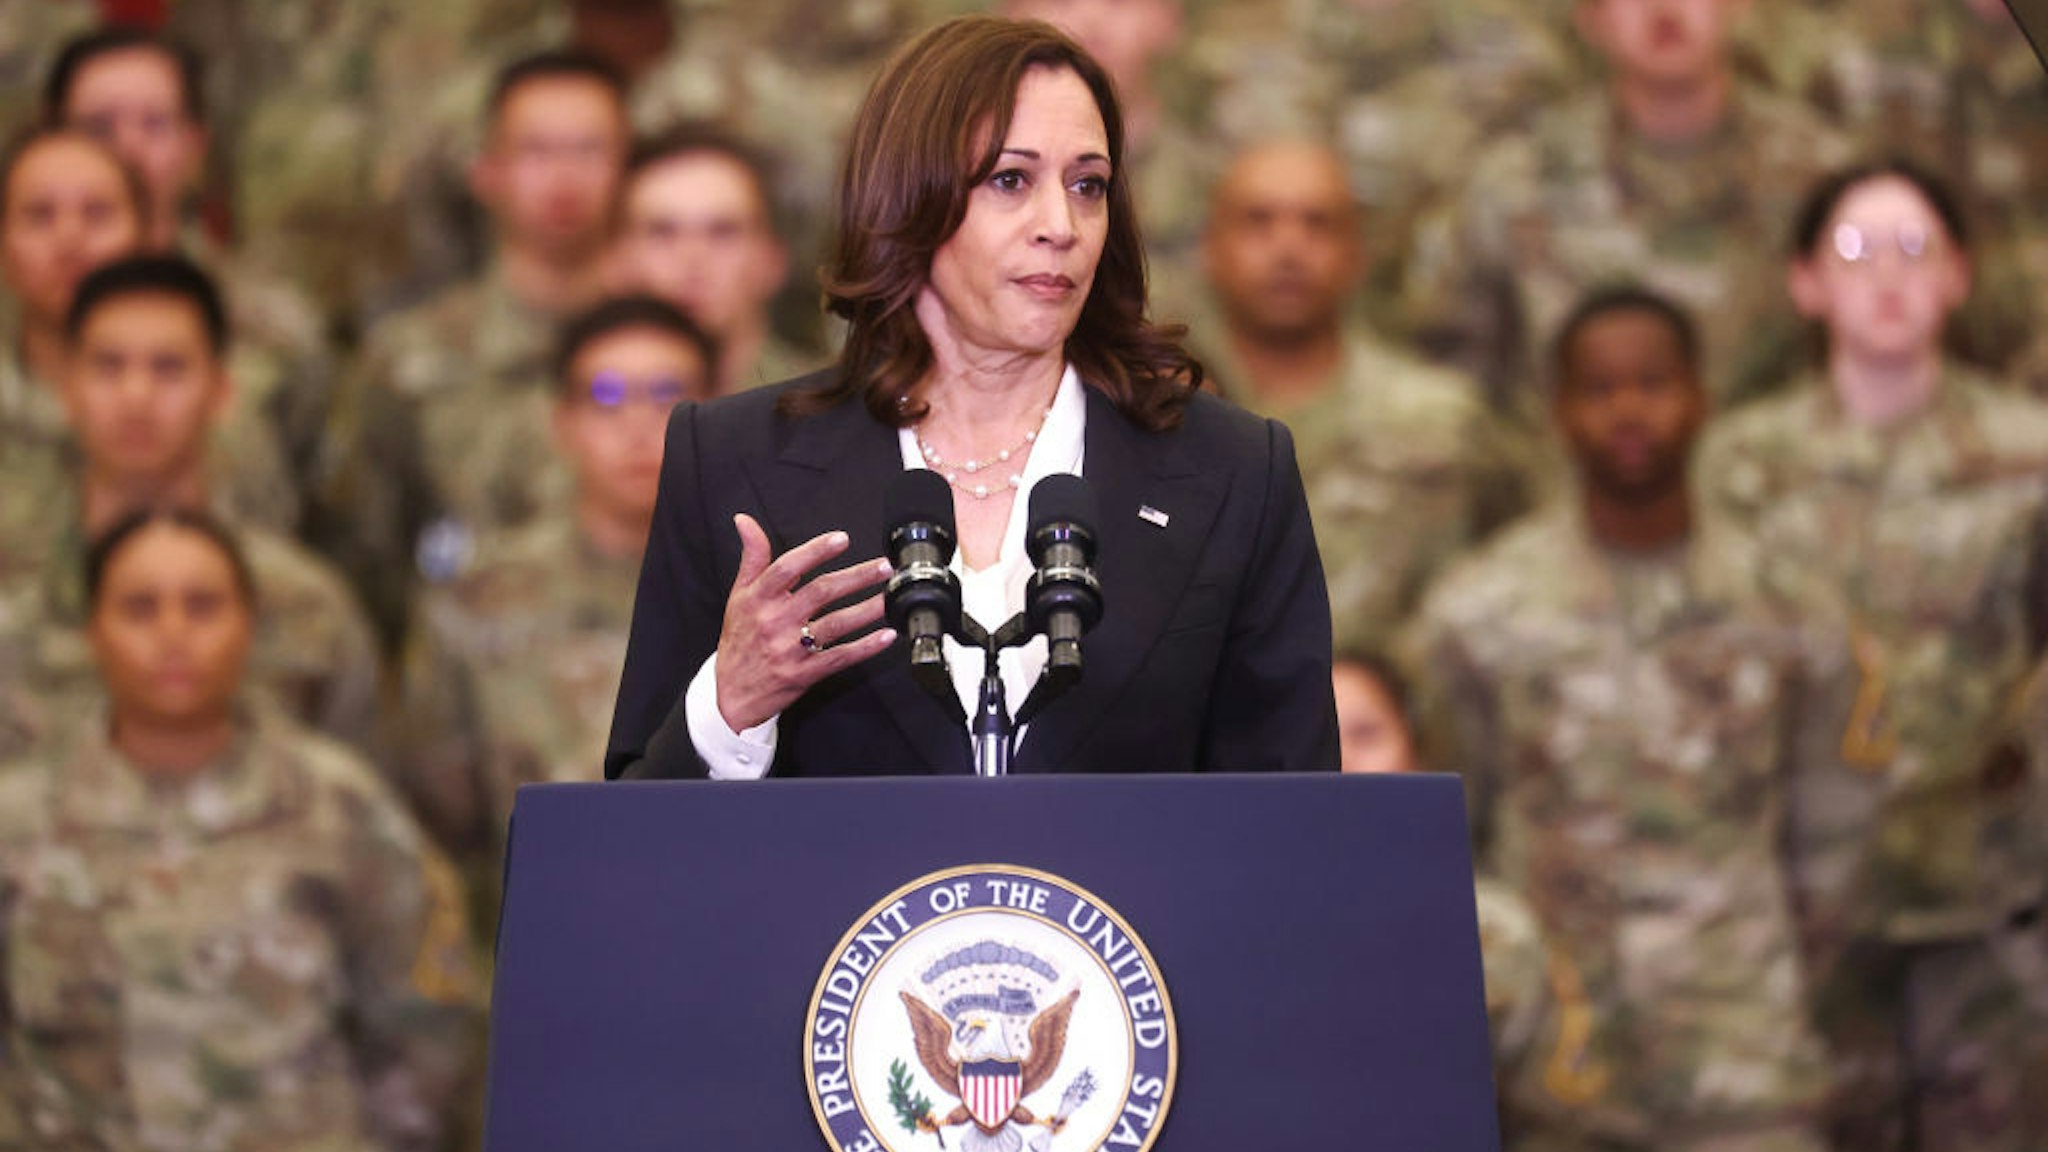 LOMPOC, CALIFORNIA - APRIL 18: U.S. Vice President Kamala Harris delivers remarks to members of Vandenberg Space Force Base at Vandenberg Space Force Base on April 18, 2022 in Lompoc, California. Harris delivered the remarks after meeting with members of the U.S. Space Force and U.S. Space Command as part of her duties as chair of the National Space Council. (Photo by Mario Tama/Getty Images)